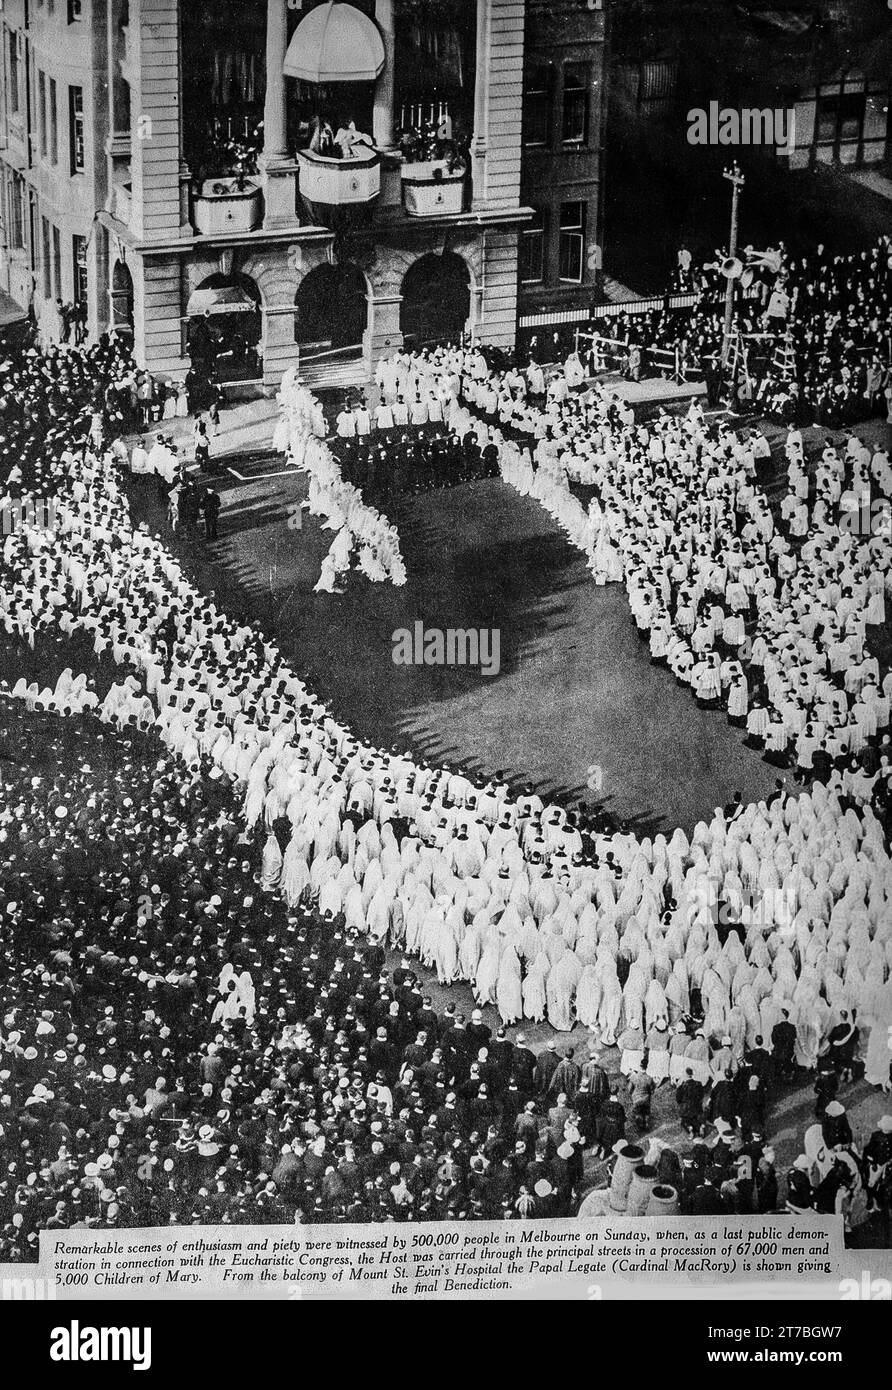 An image from the 1934 Eucharistic Congress in Melbourne, Australia. The image shows the Papal Legate, Cardinal MacRory give the final Benediction, after a procession of 67000 men and 5000 children carried The Host through the centre of Melbourne, witnessed it is said by half a million people. Stock Photo